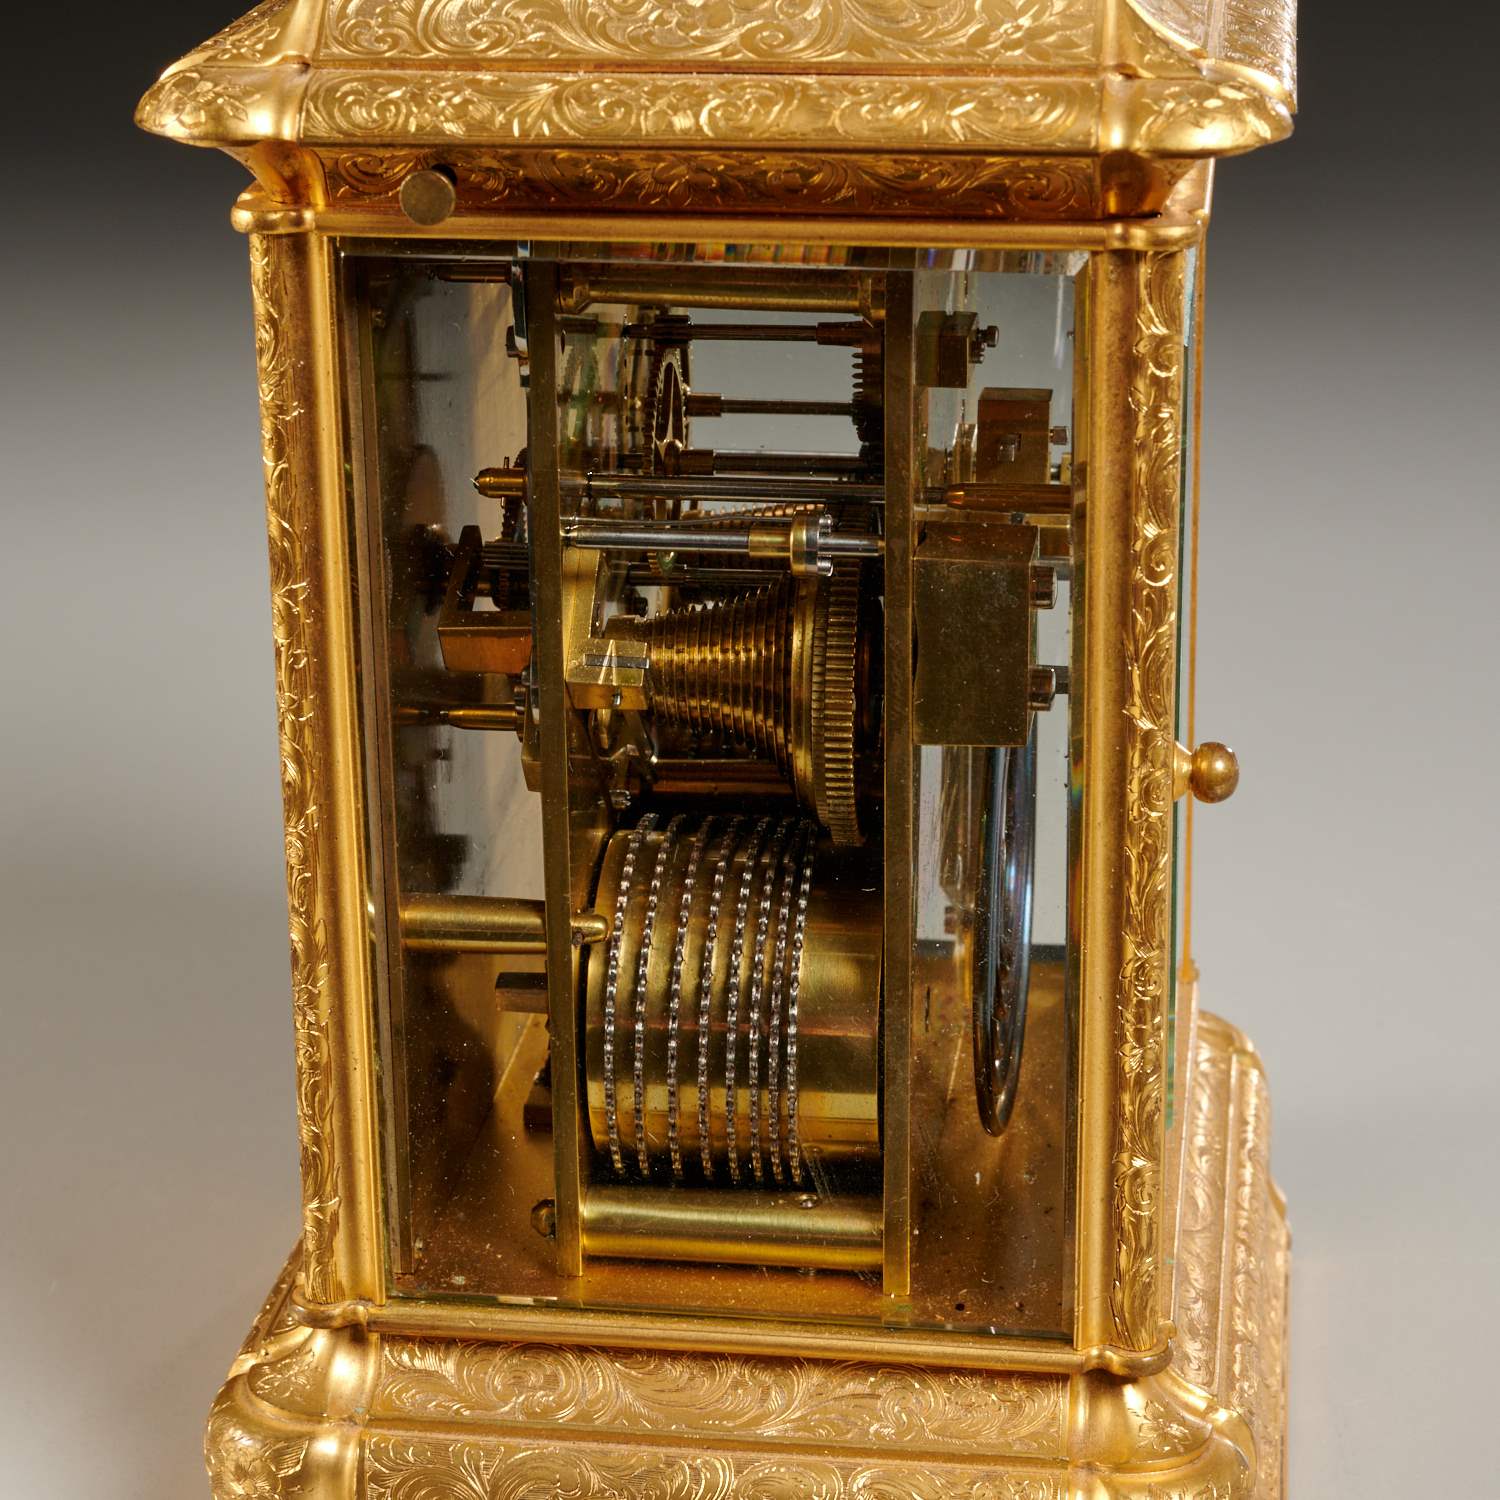 Barraud & Lunds, rare Victorian carriage clock - Image 3 of 7